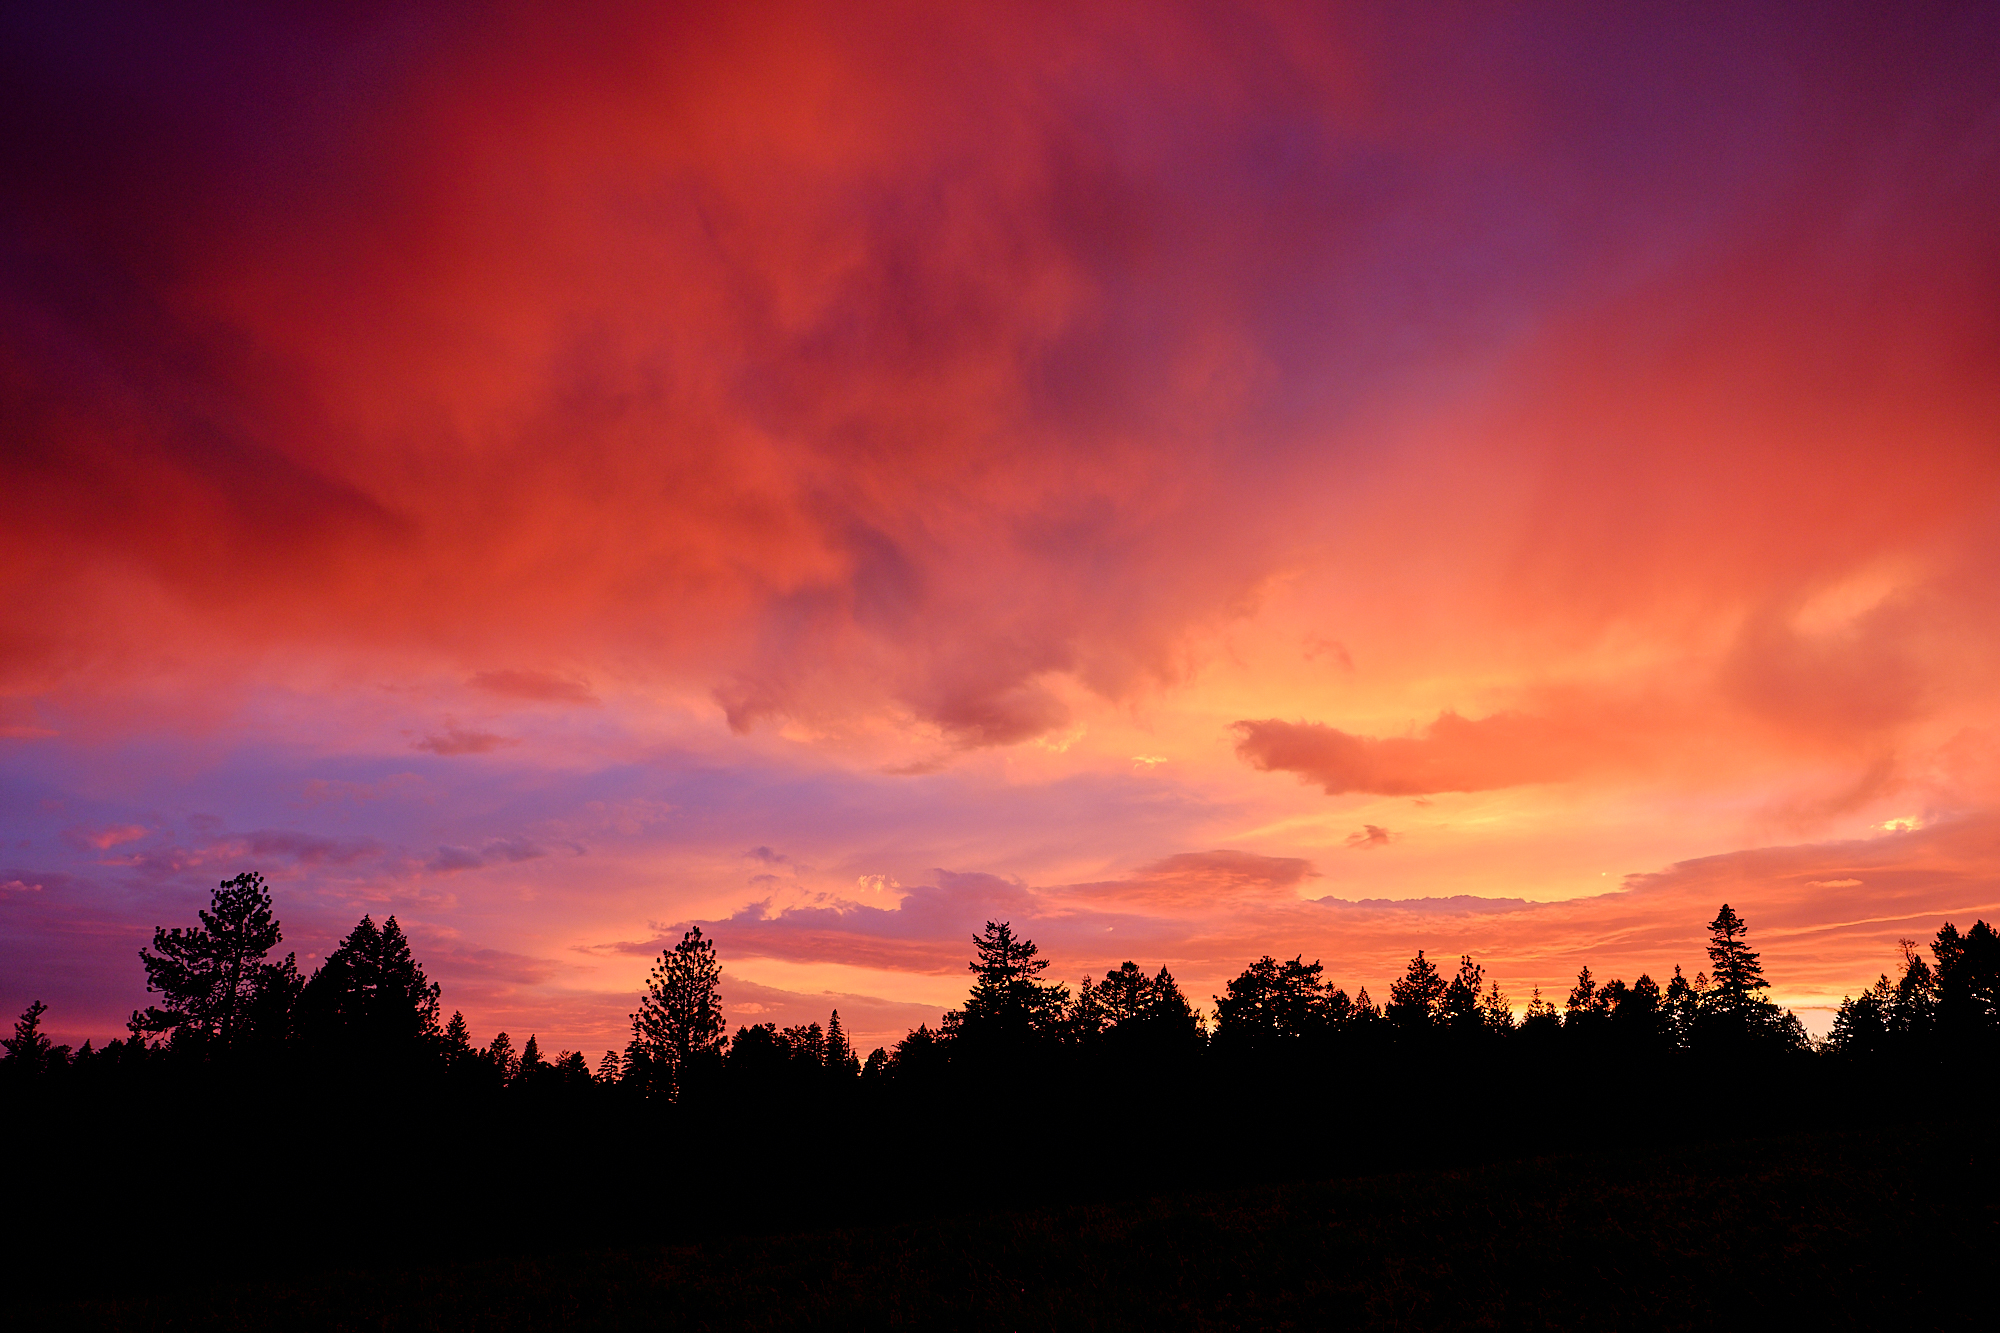  Fire in the sky. | Ochoco National Forest, OR 7/17/18 